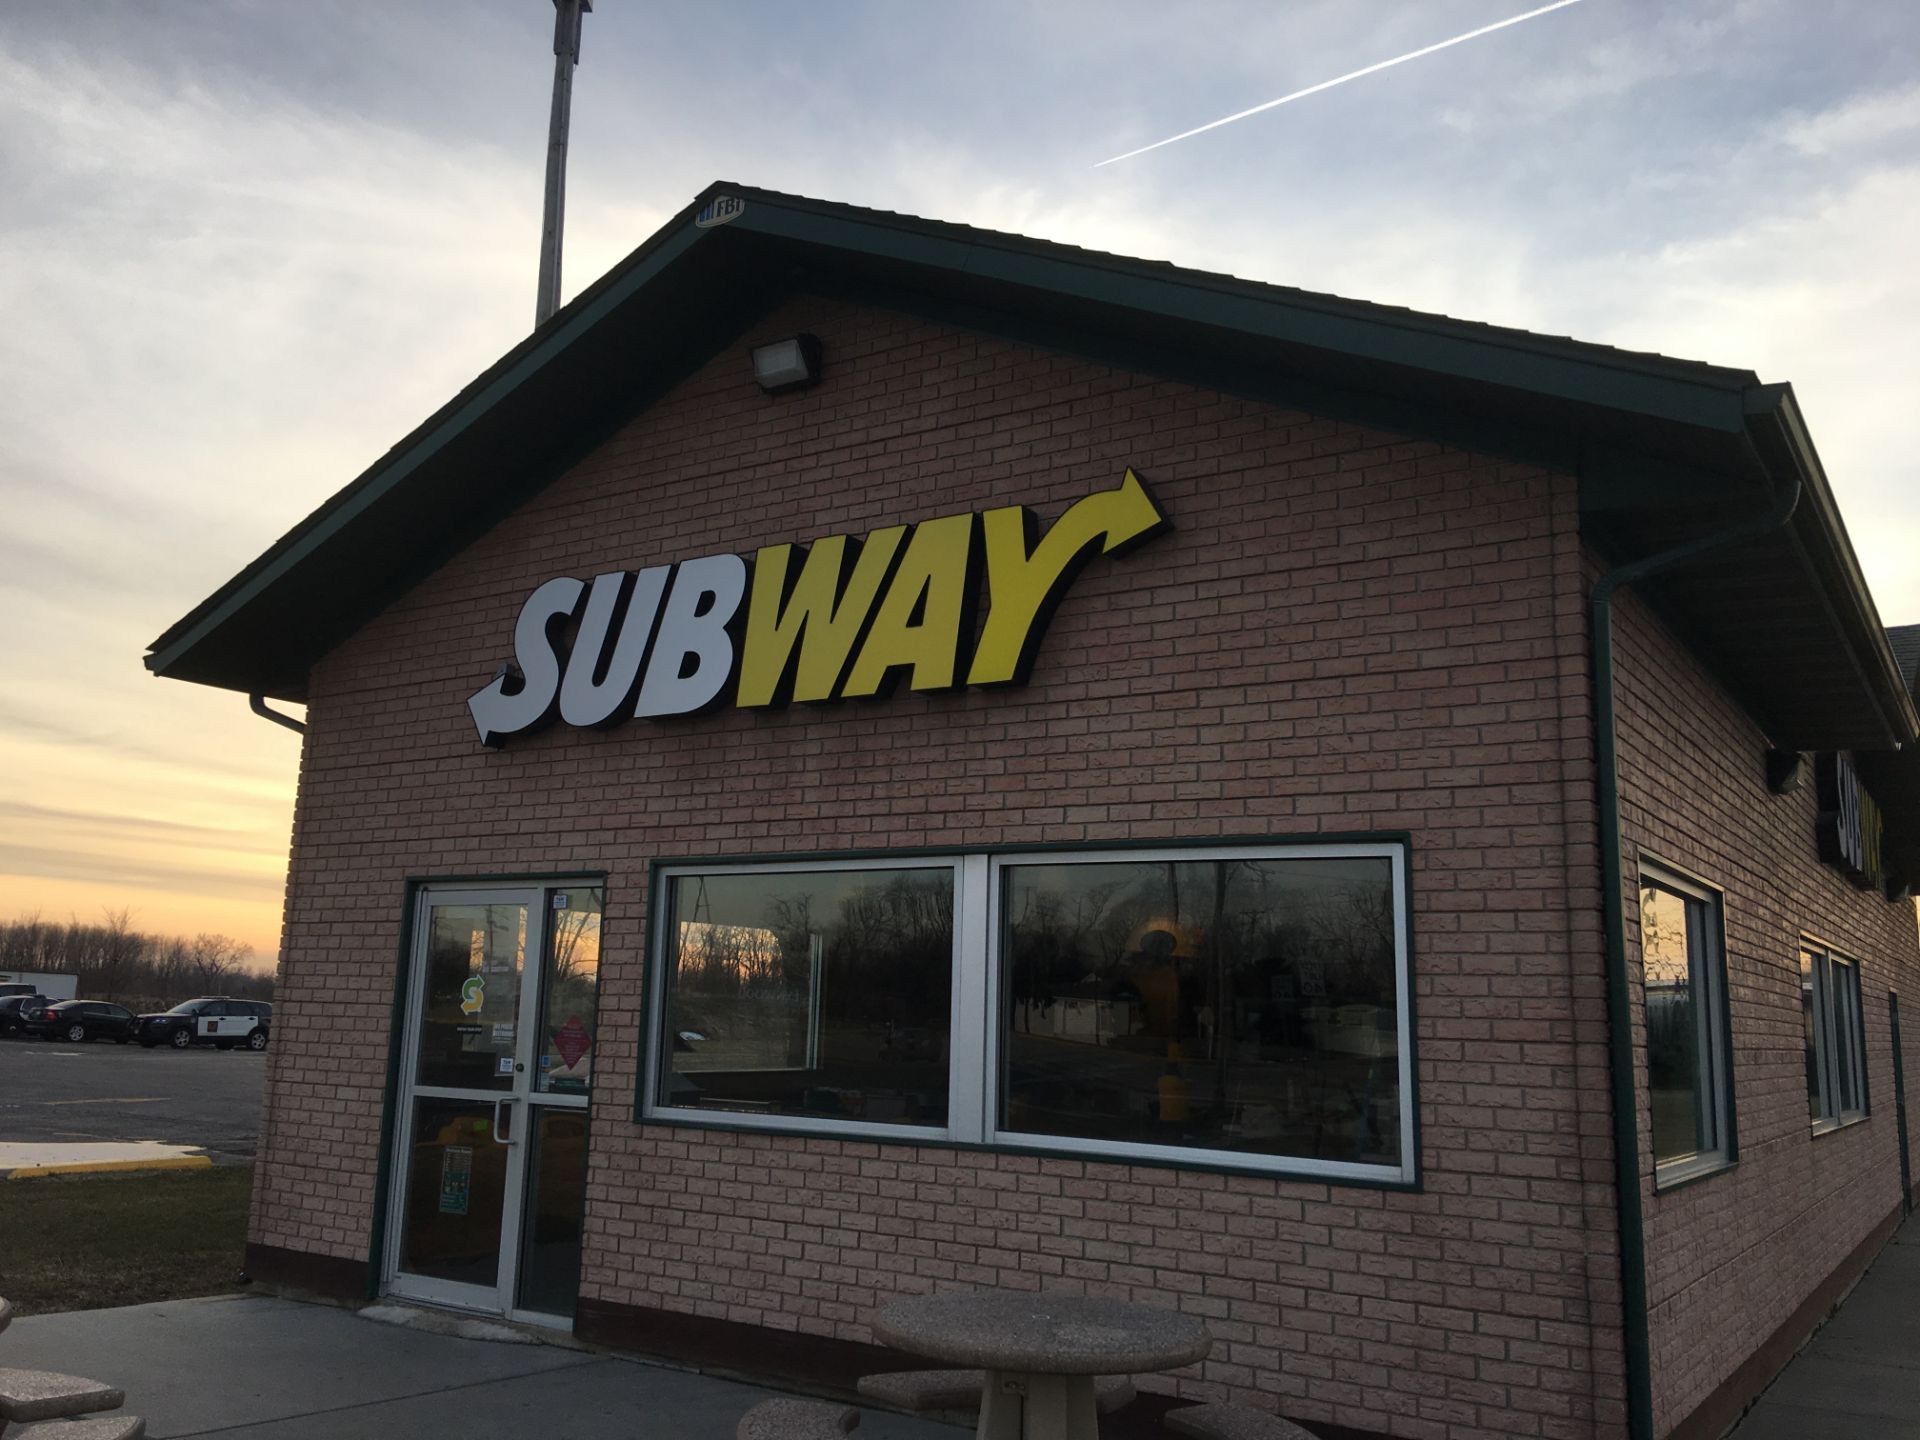 2 SUBWAY store front signs